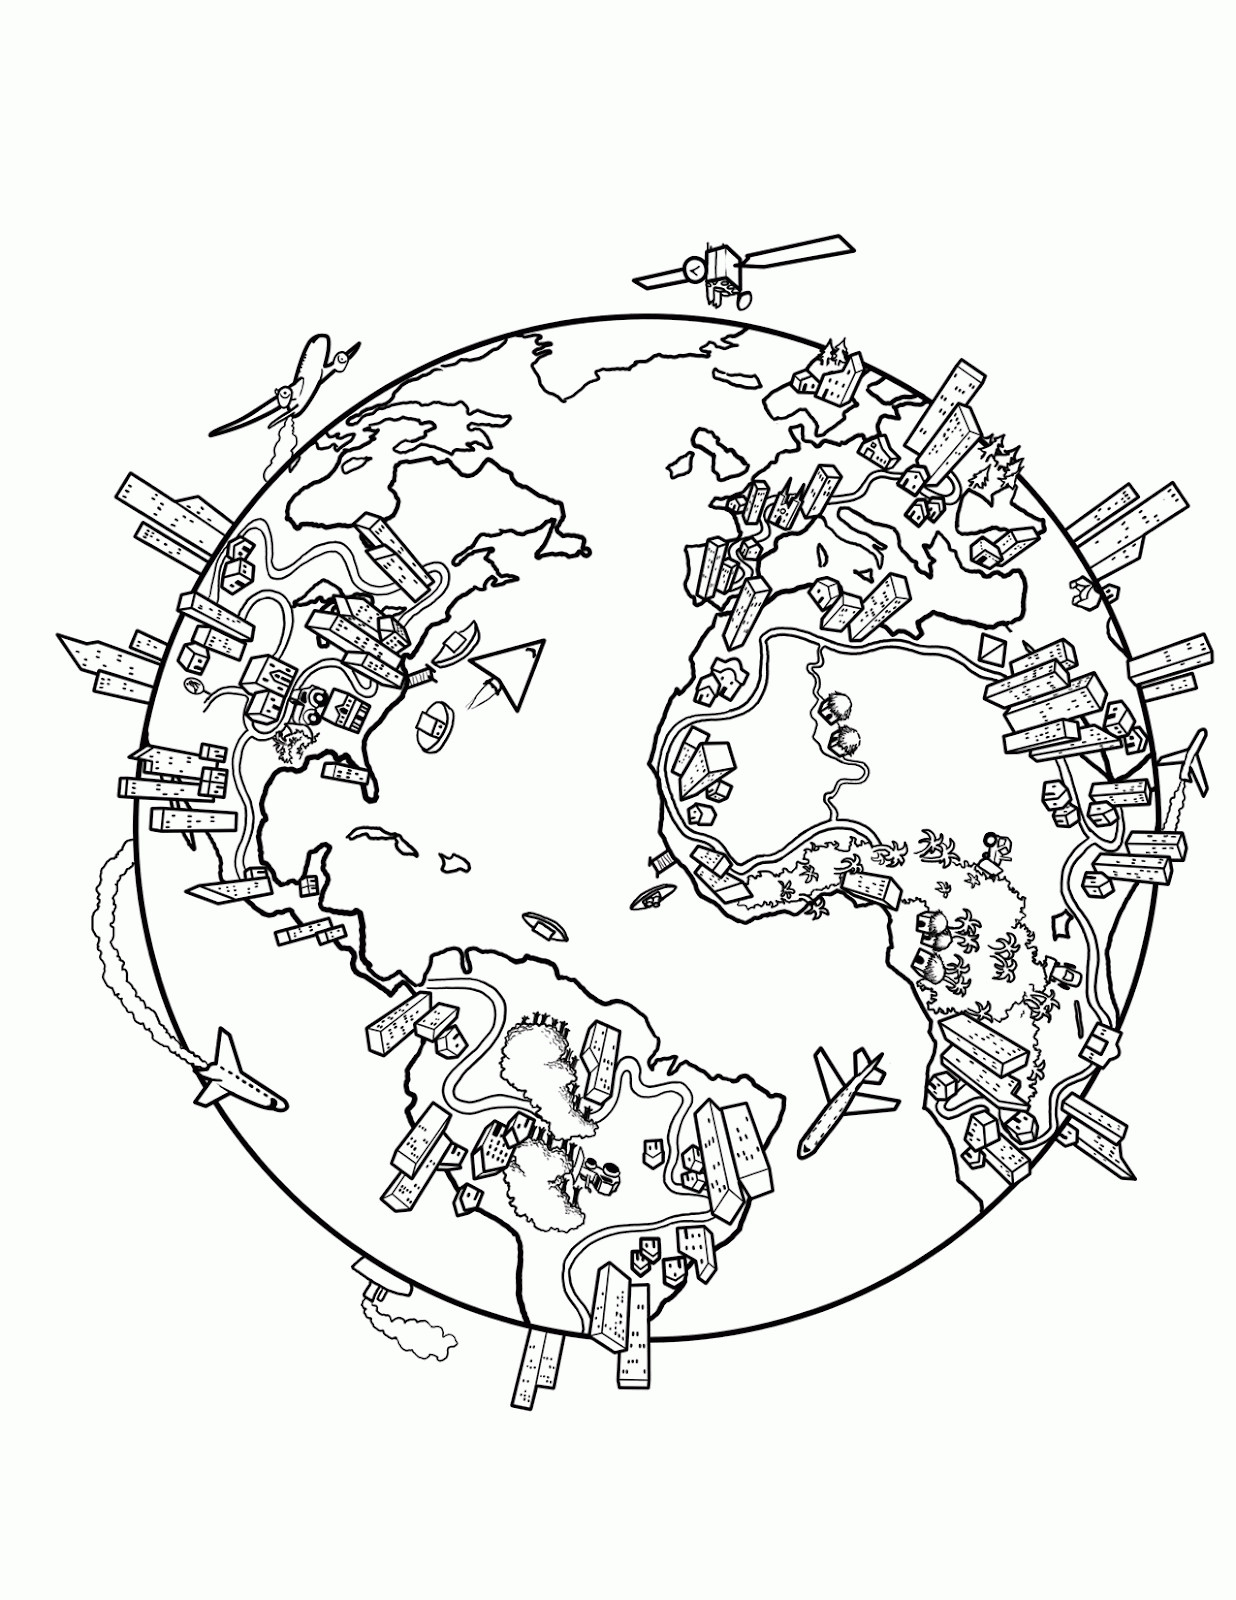 Children Of The World Coloring Pages
 Coloring Pages Children Around The World Coloring Home